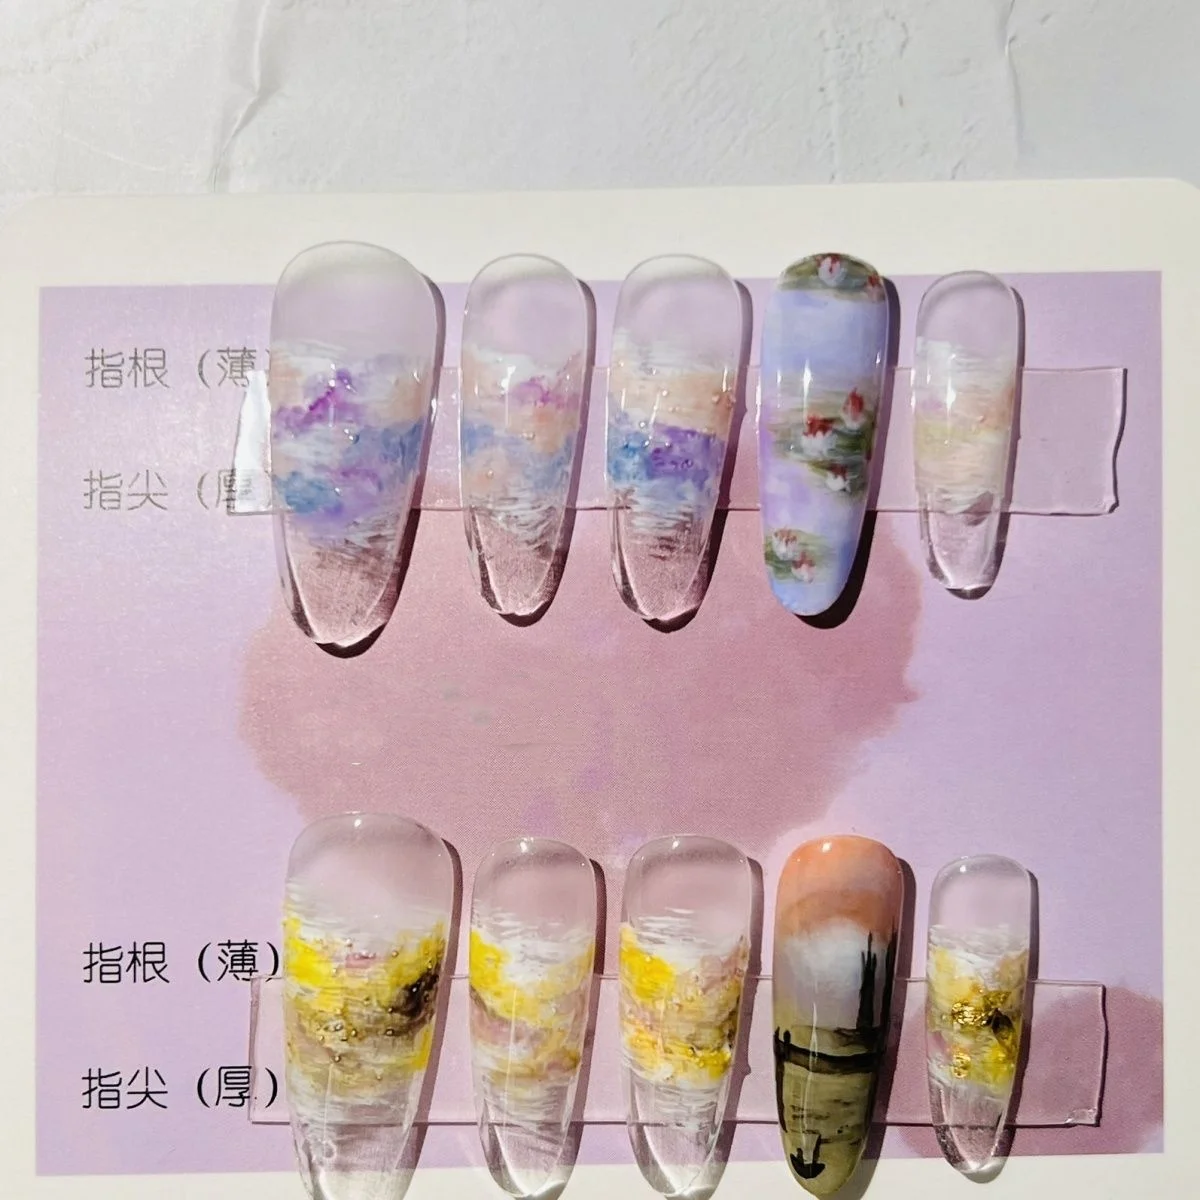 

Monet oil painting style manicure | Press-on nails | Hand-painted advanced reusable nails | Glamor fake nails | Summer manicure